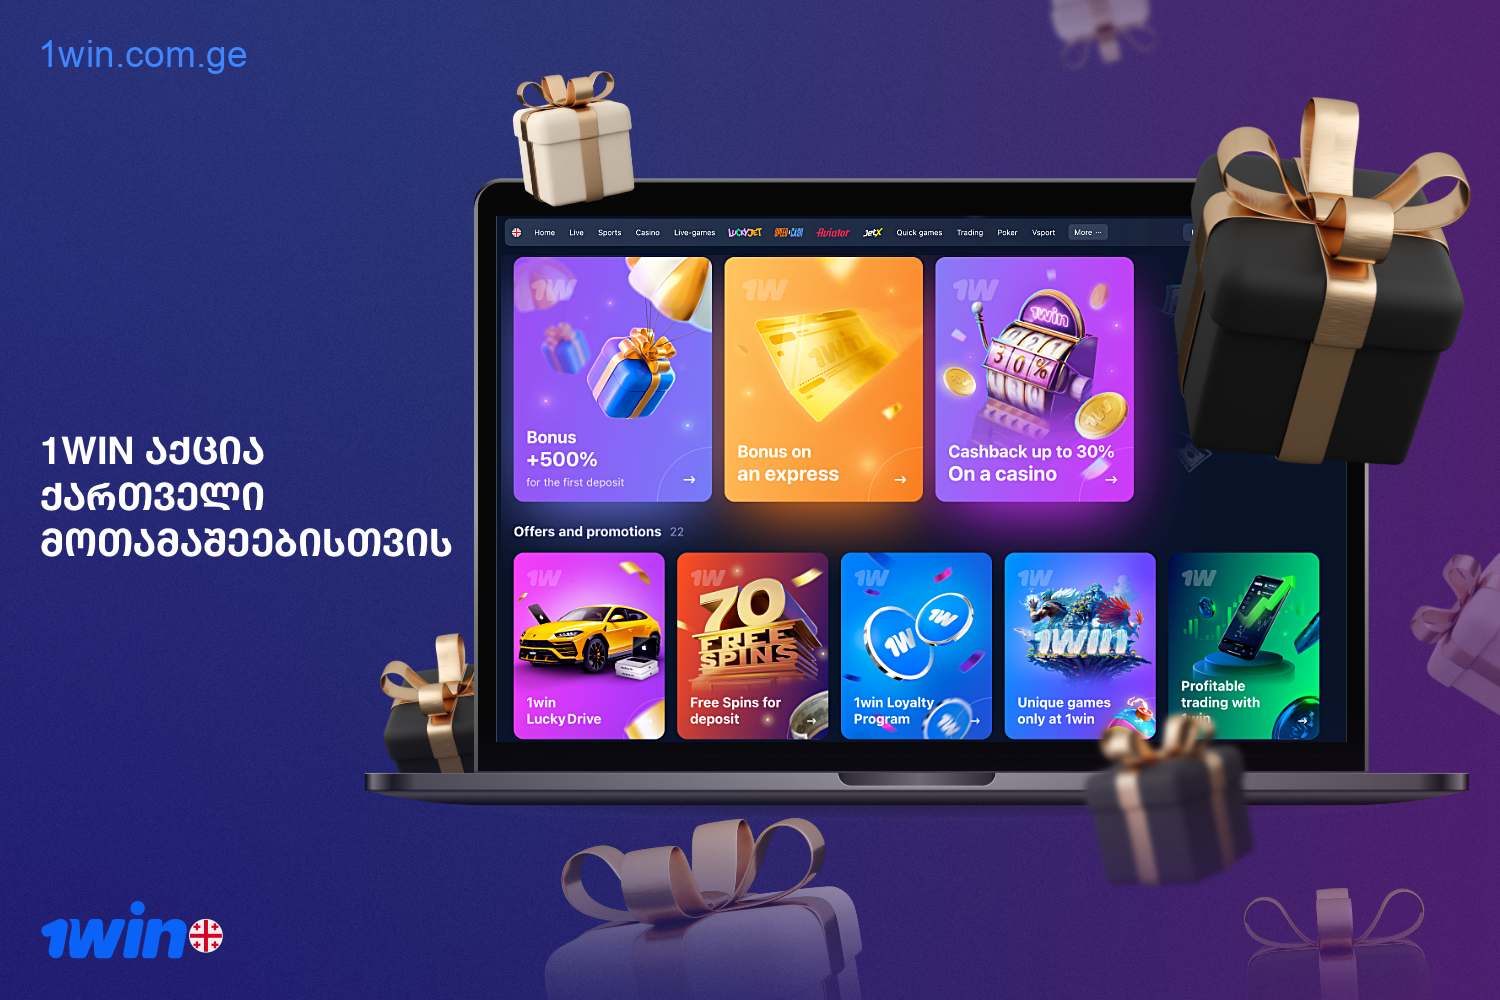 1win offers many bonuses and interesting promotions to its Georgian users